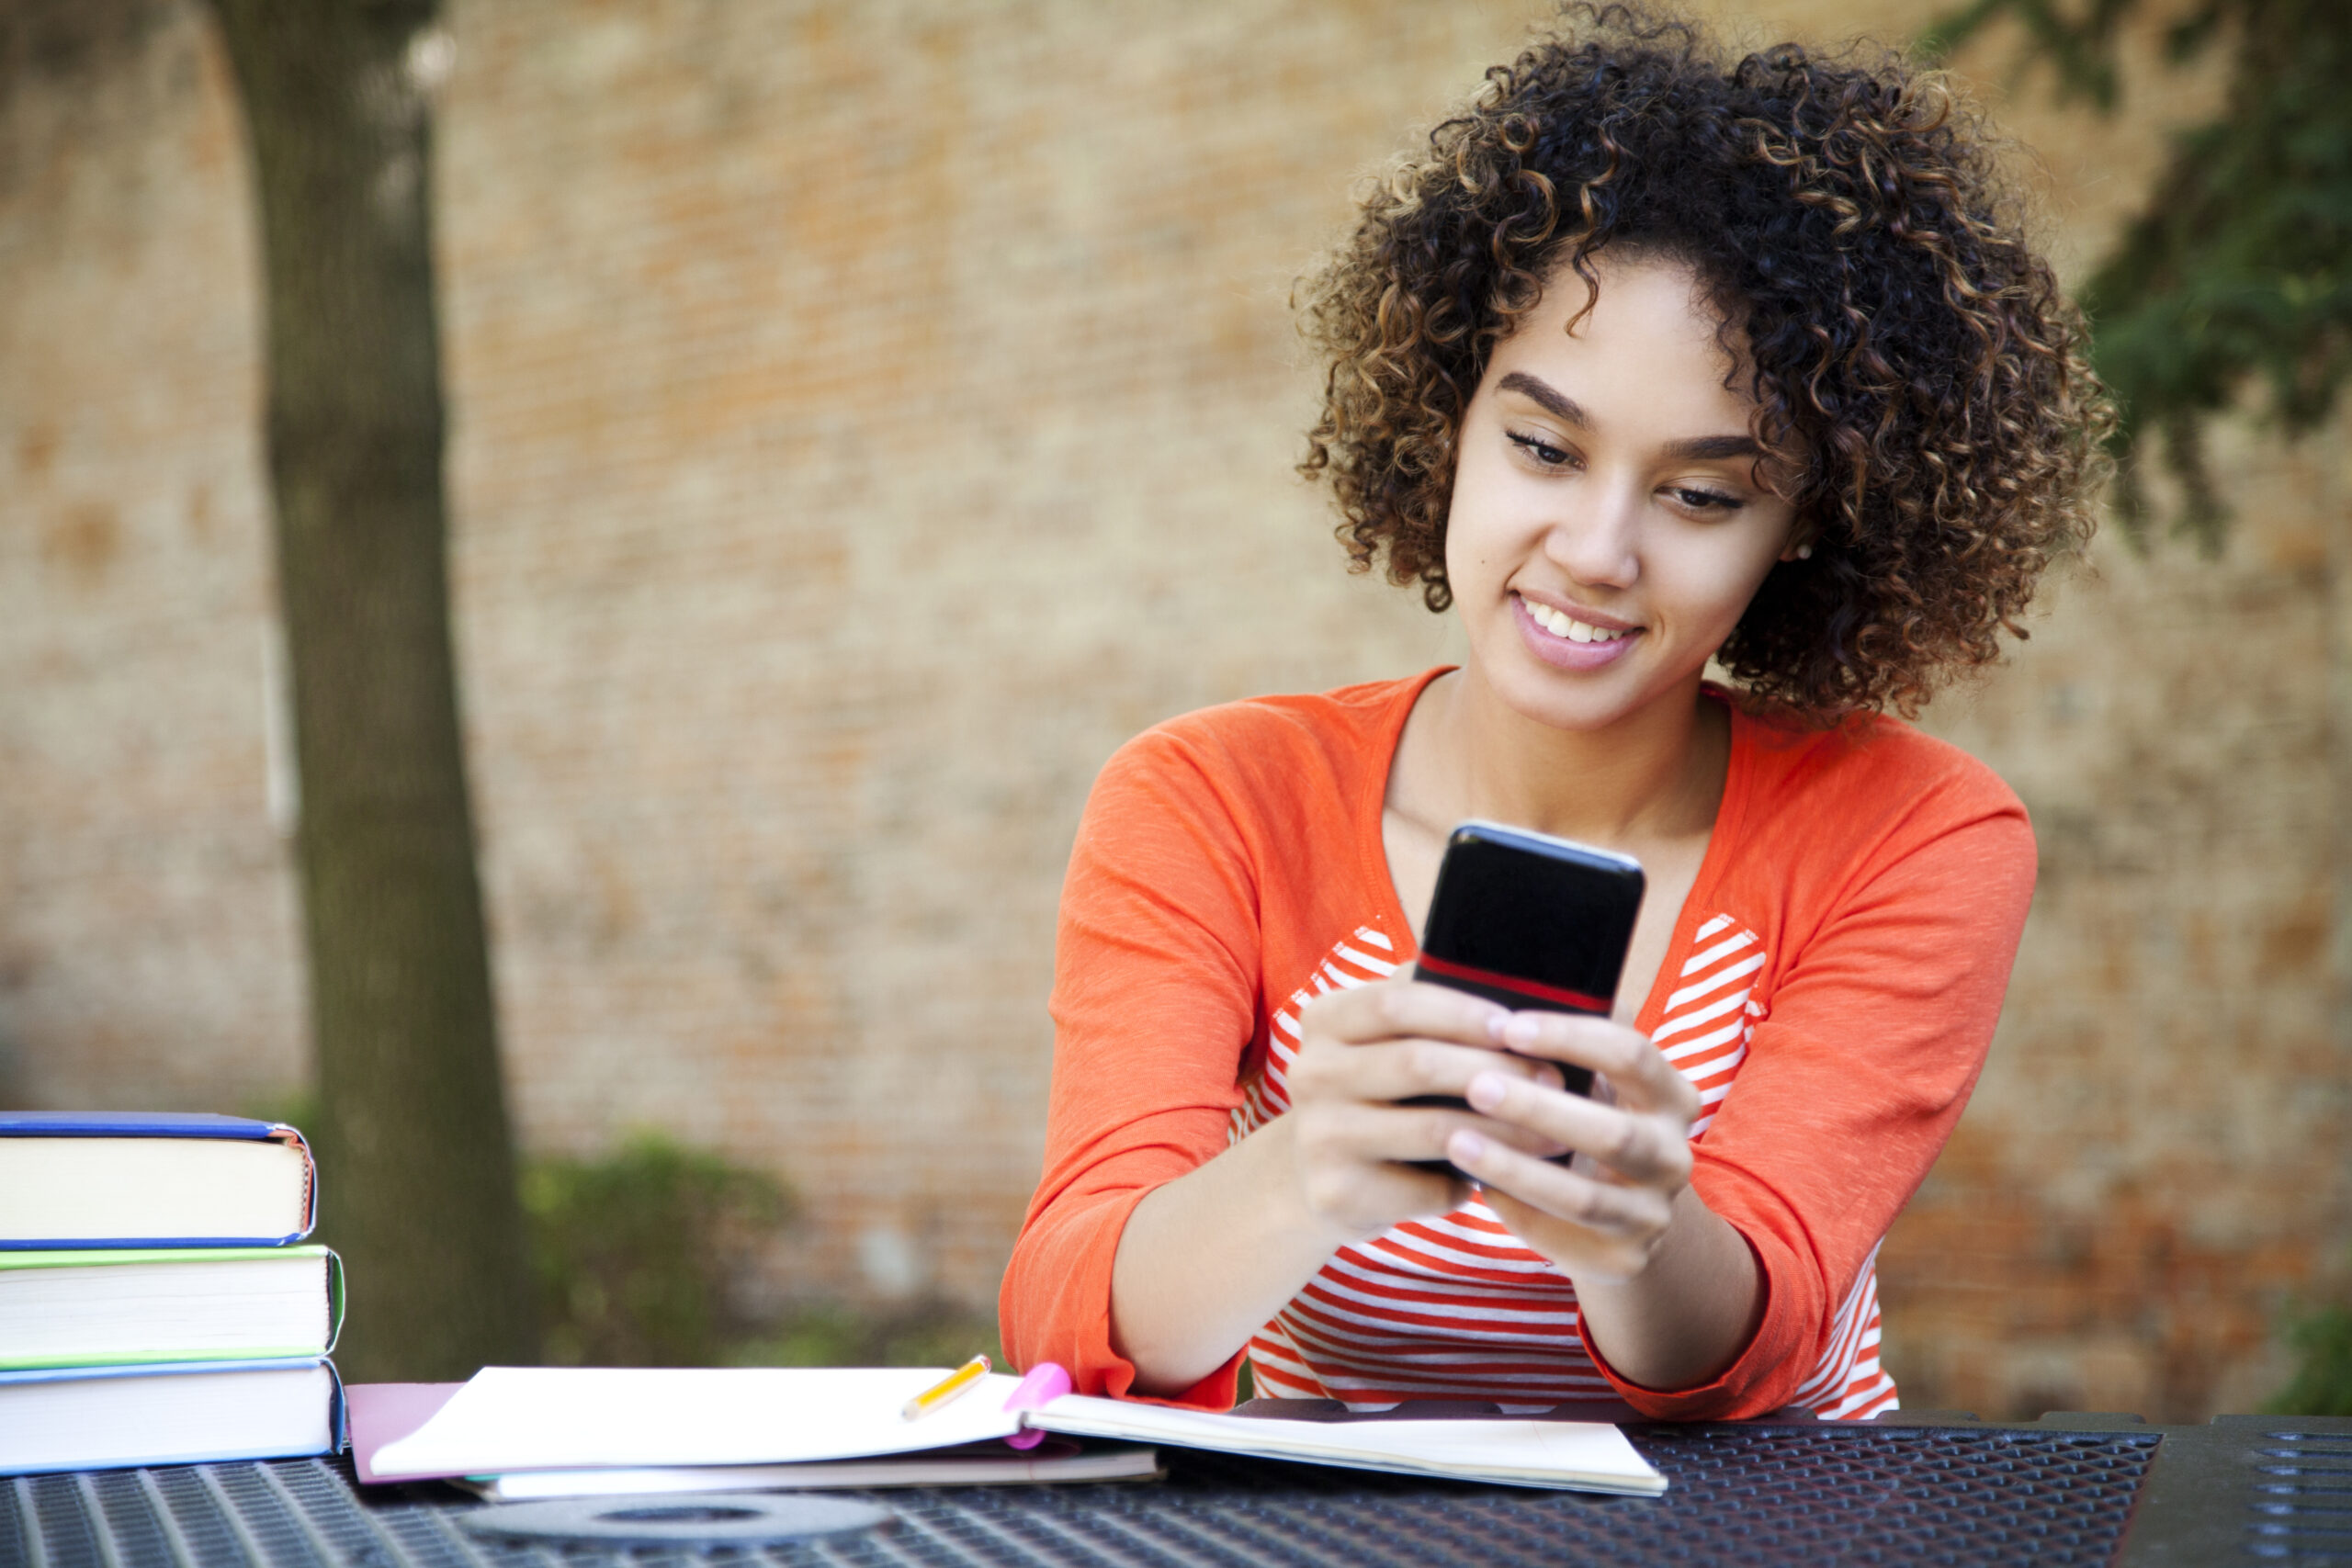 Ethnic female student with curly hair wearing wearing an orange shirt and texting with her smart phone